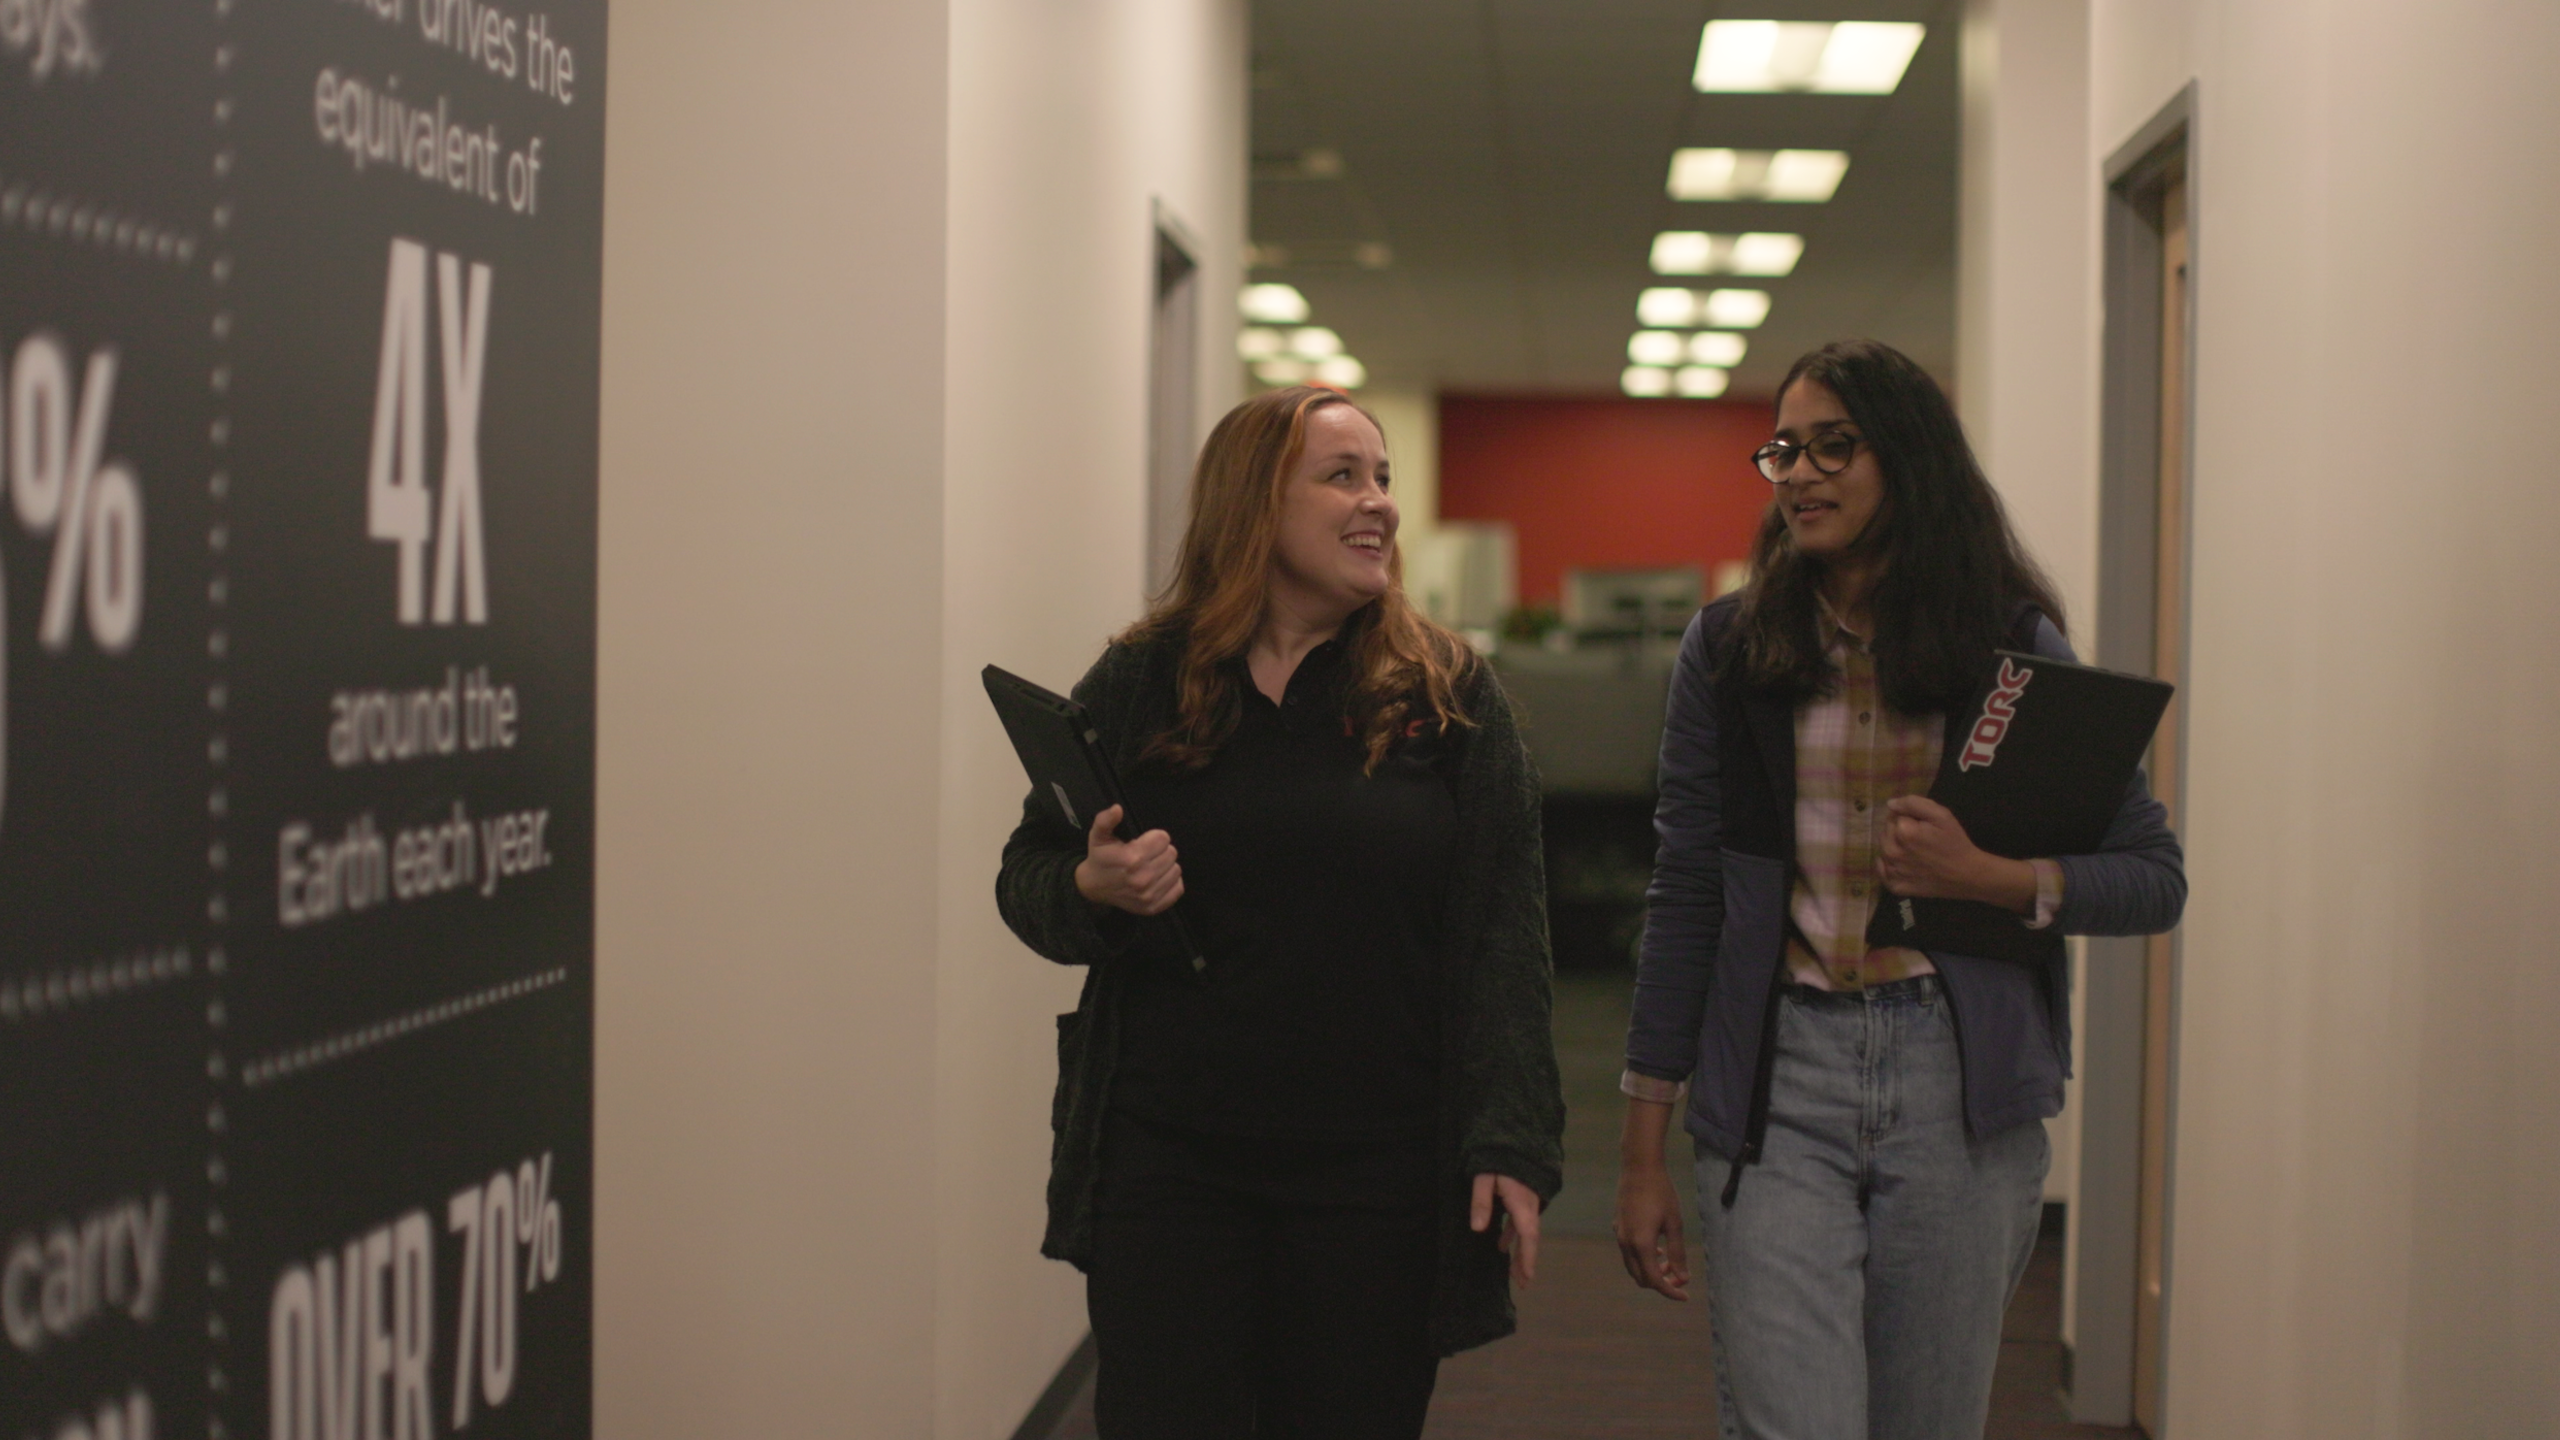 Two Torc Robotics team members chat while walking down an office hallway.